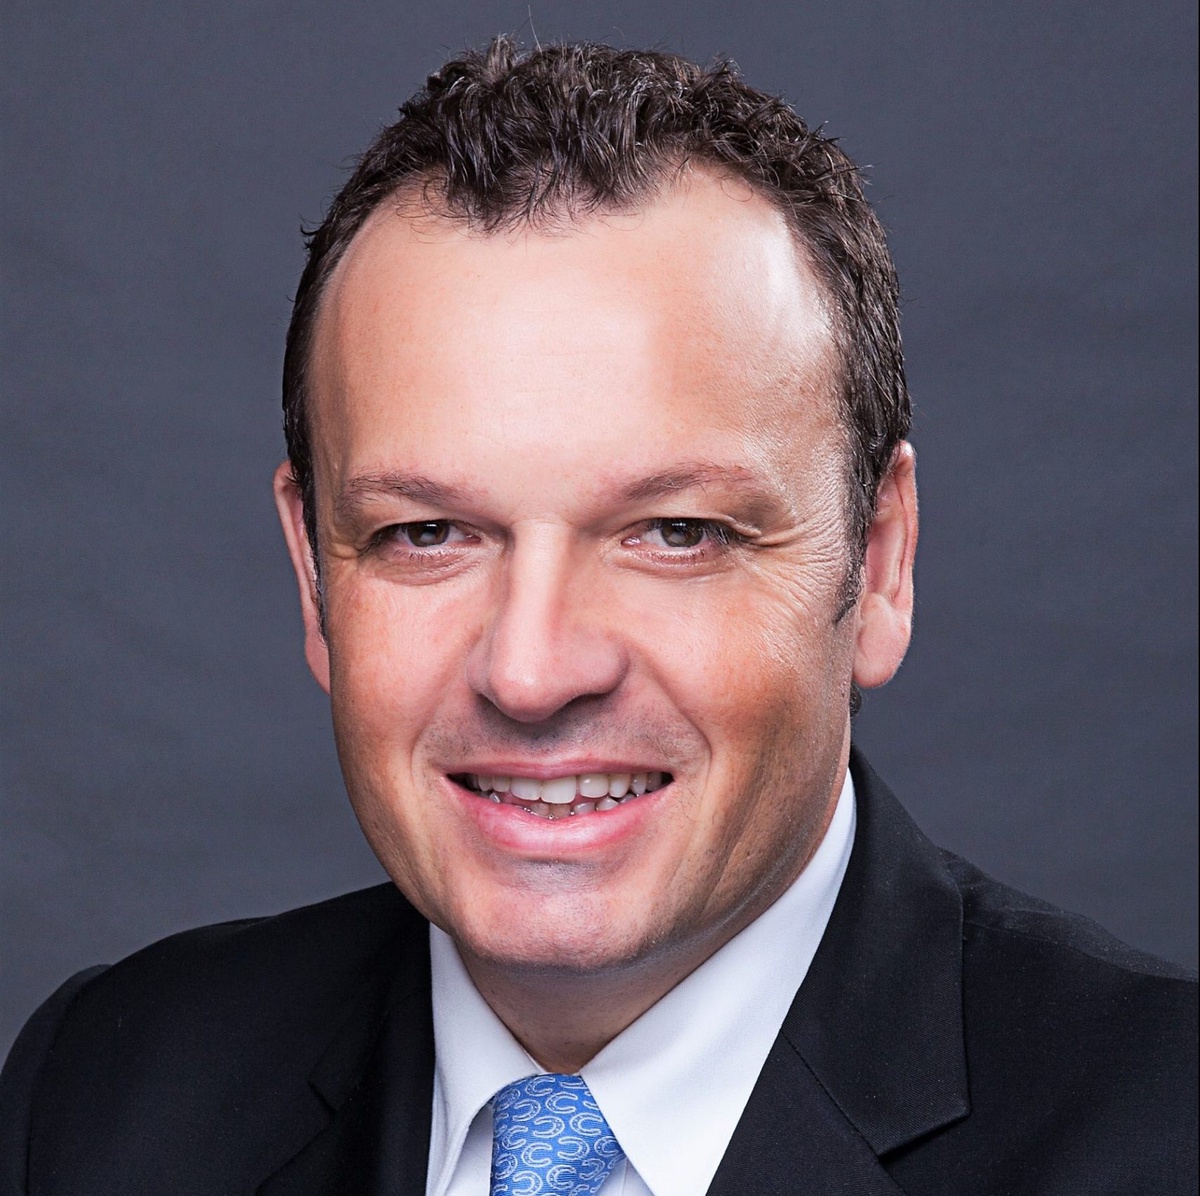 Dusit International appoints new Chief Operating Officer - Gilles Cretallaz